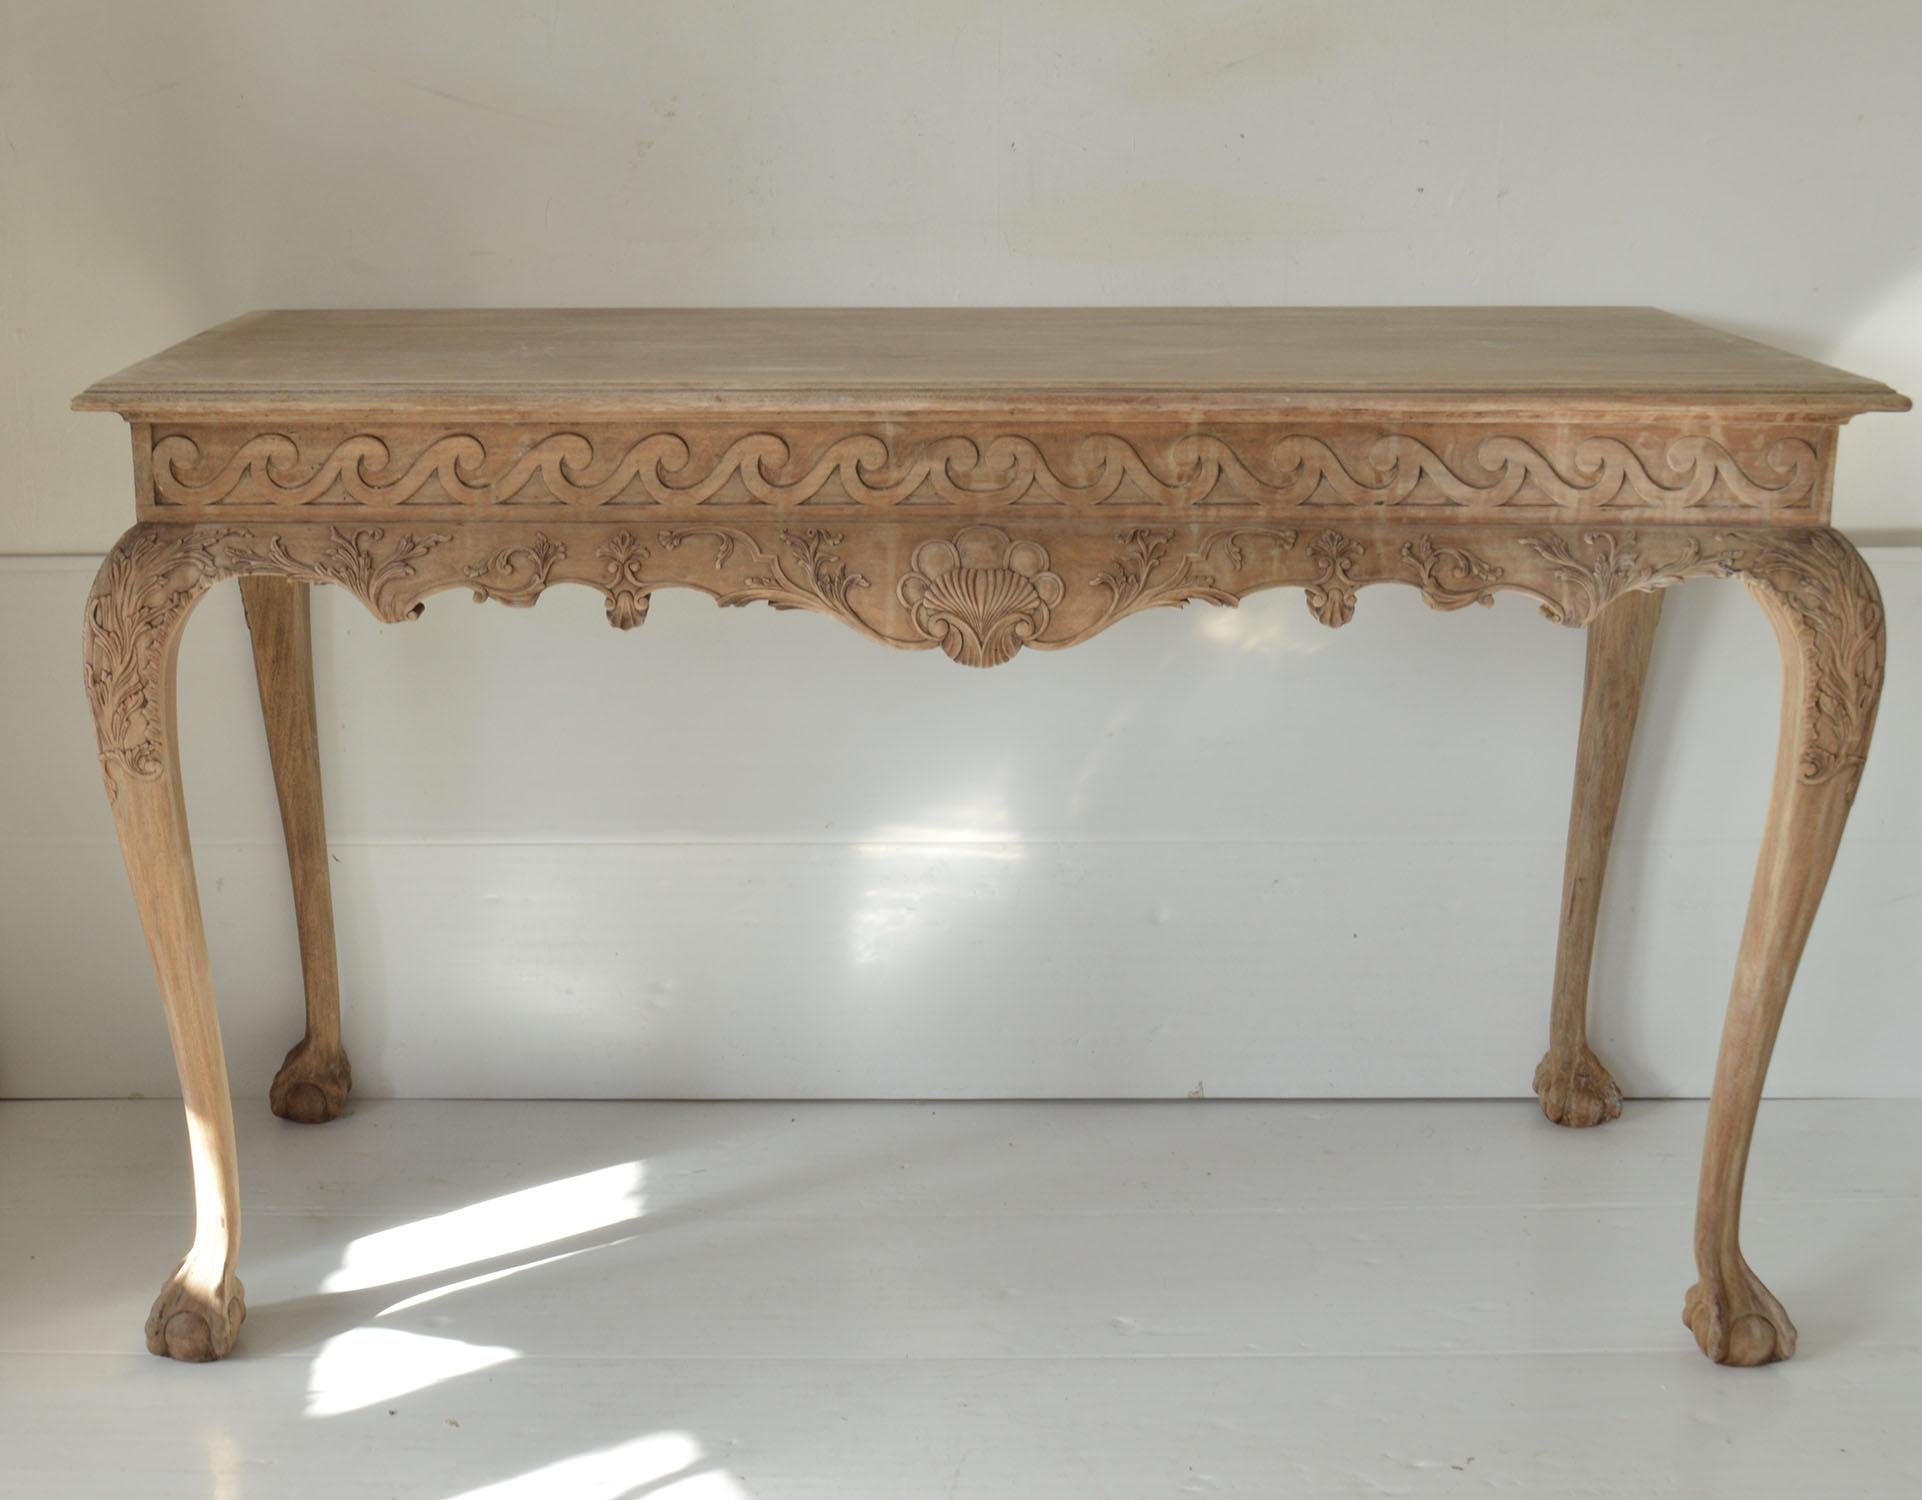 Fabulous carved mahogany console or serving table.

The piece is a good quality 20th century reproduction that we have recently bleached. It has created great distressed look.

The original 18th century table was probably Irish.

Difficult to